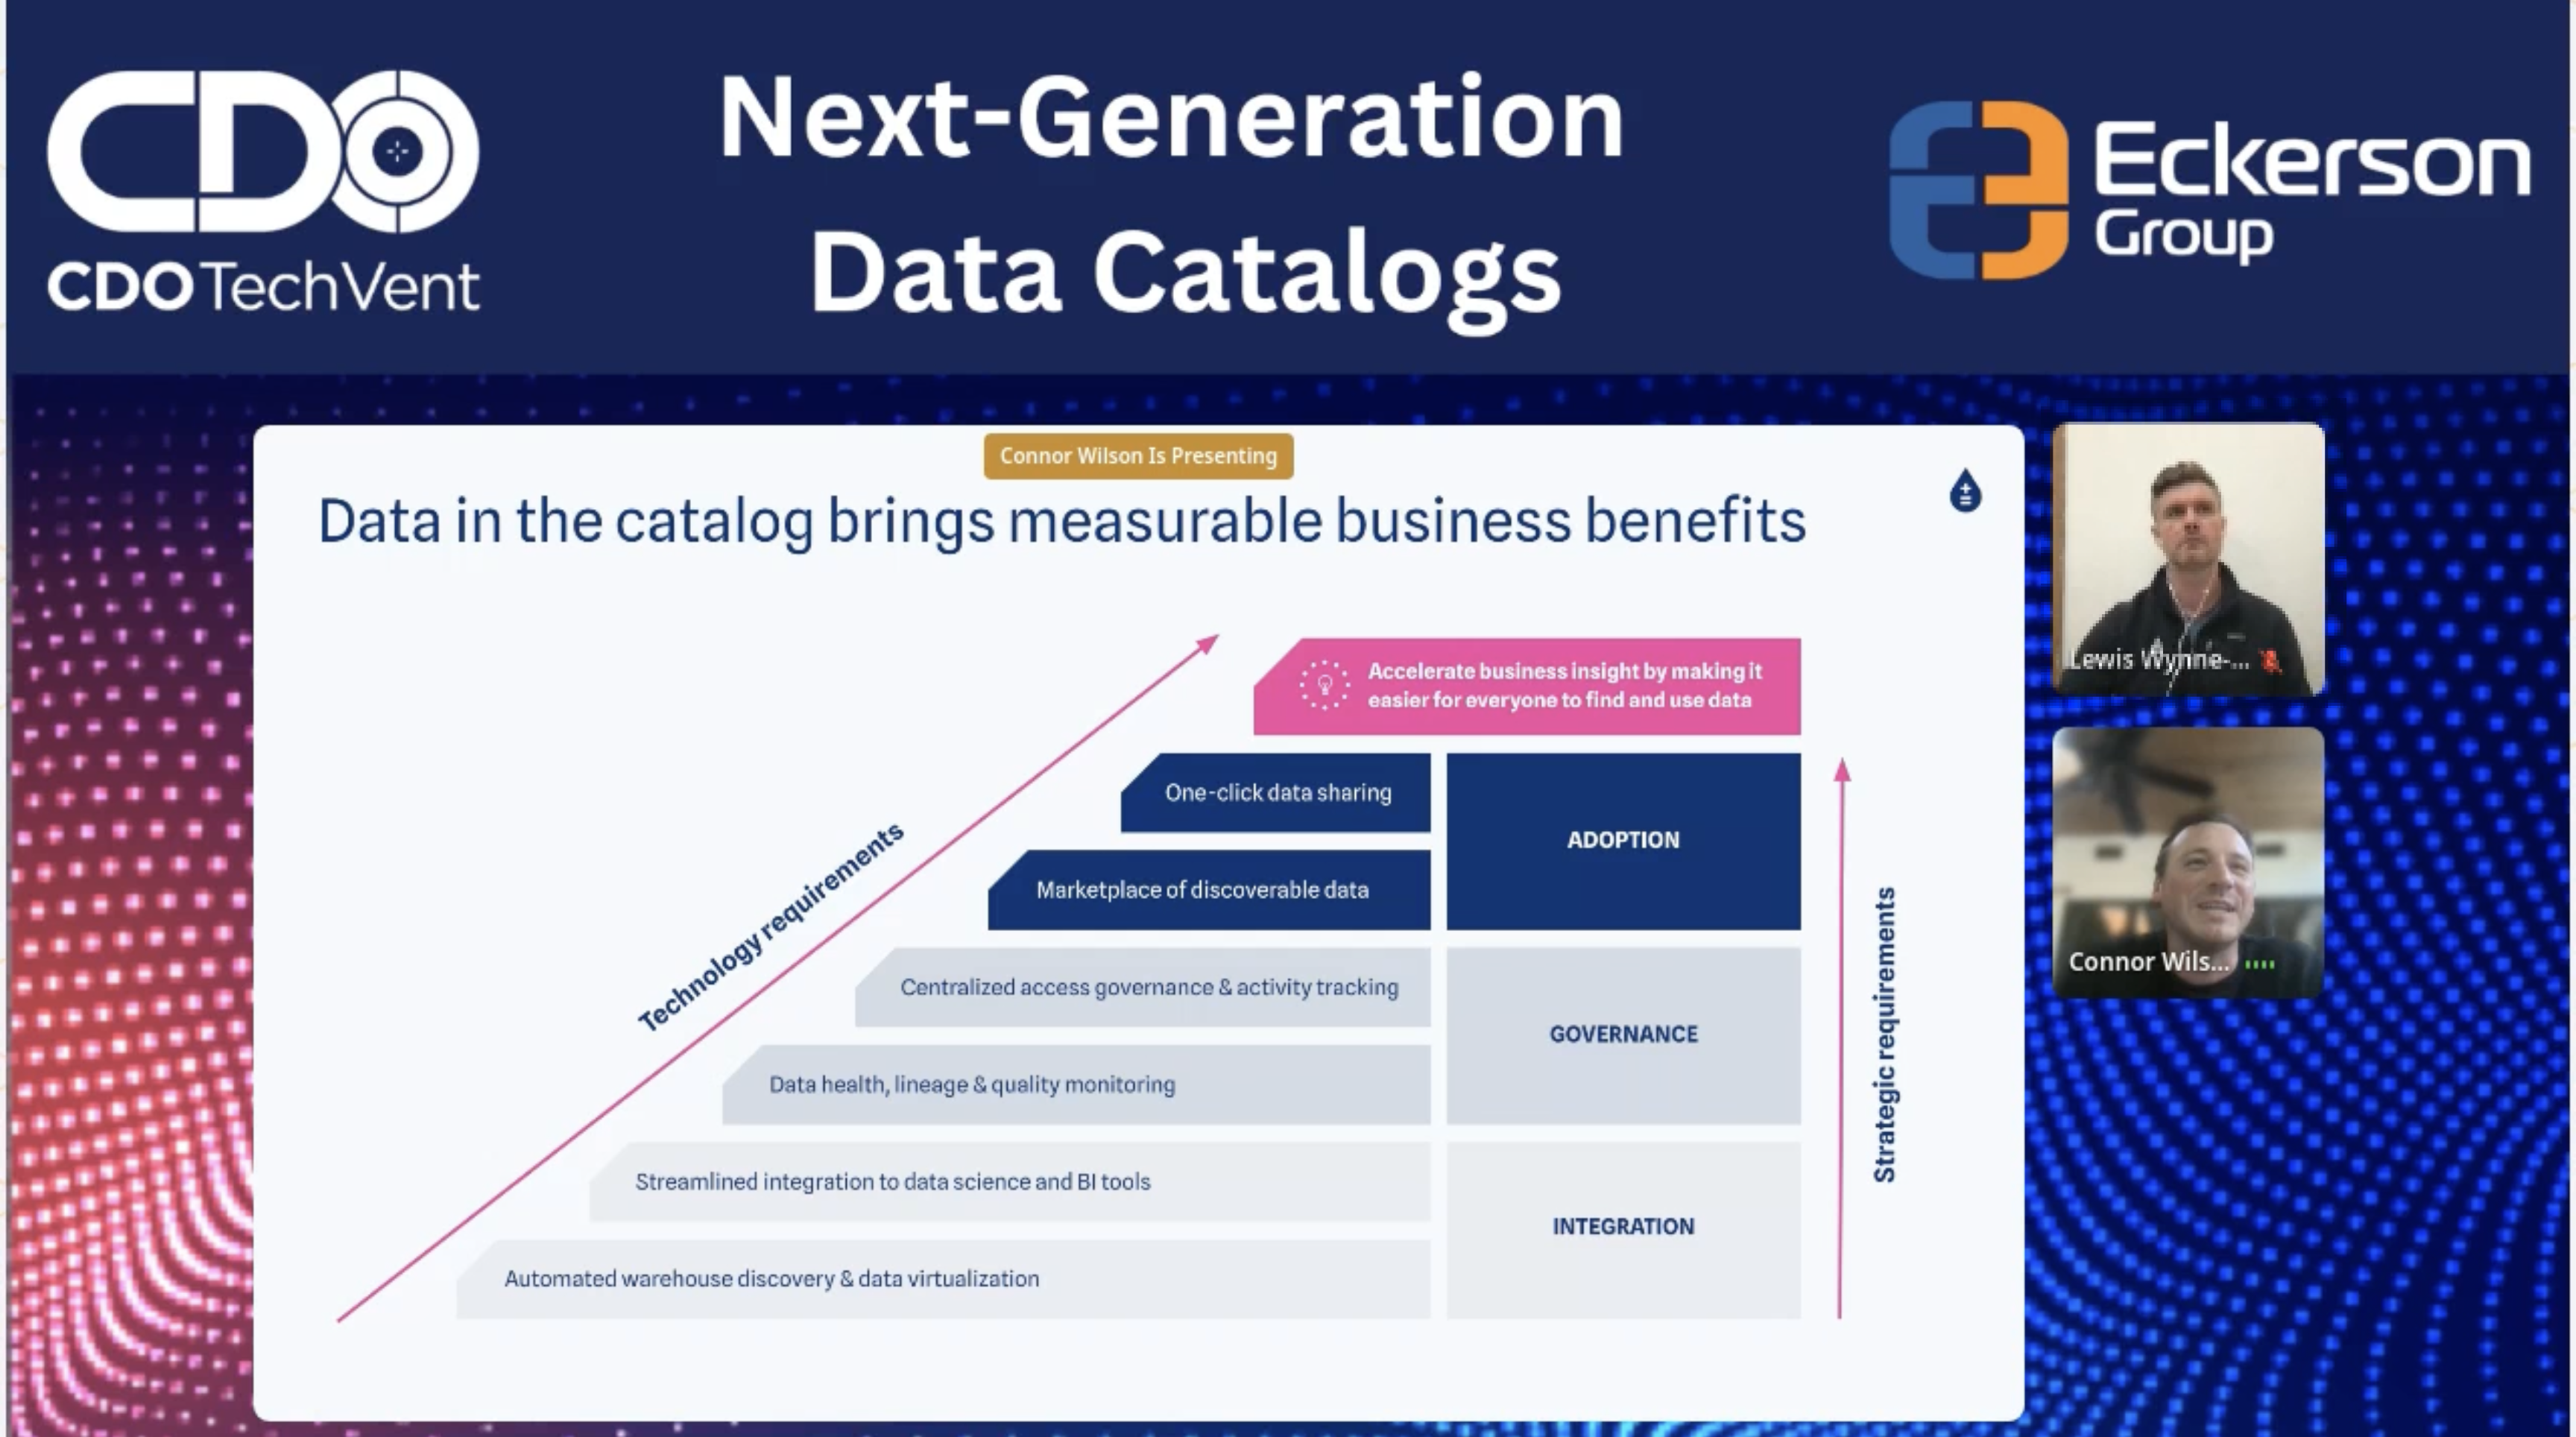 Presentation title: "Next-Generation Data Catalogs" with two presenters sharing a slide describing benefits of data catalogs (text too small to read)